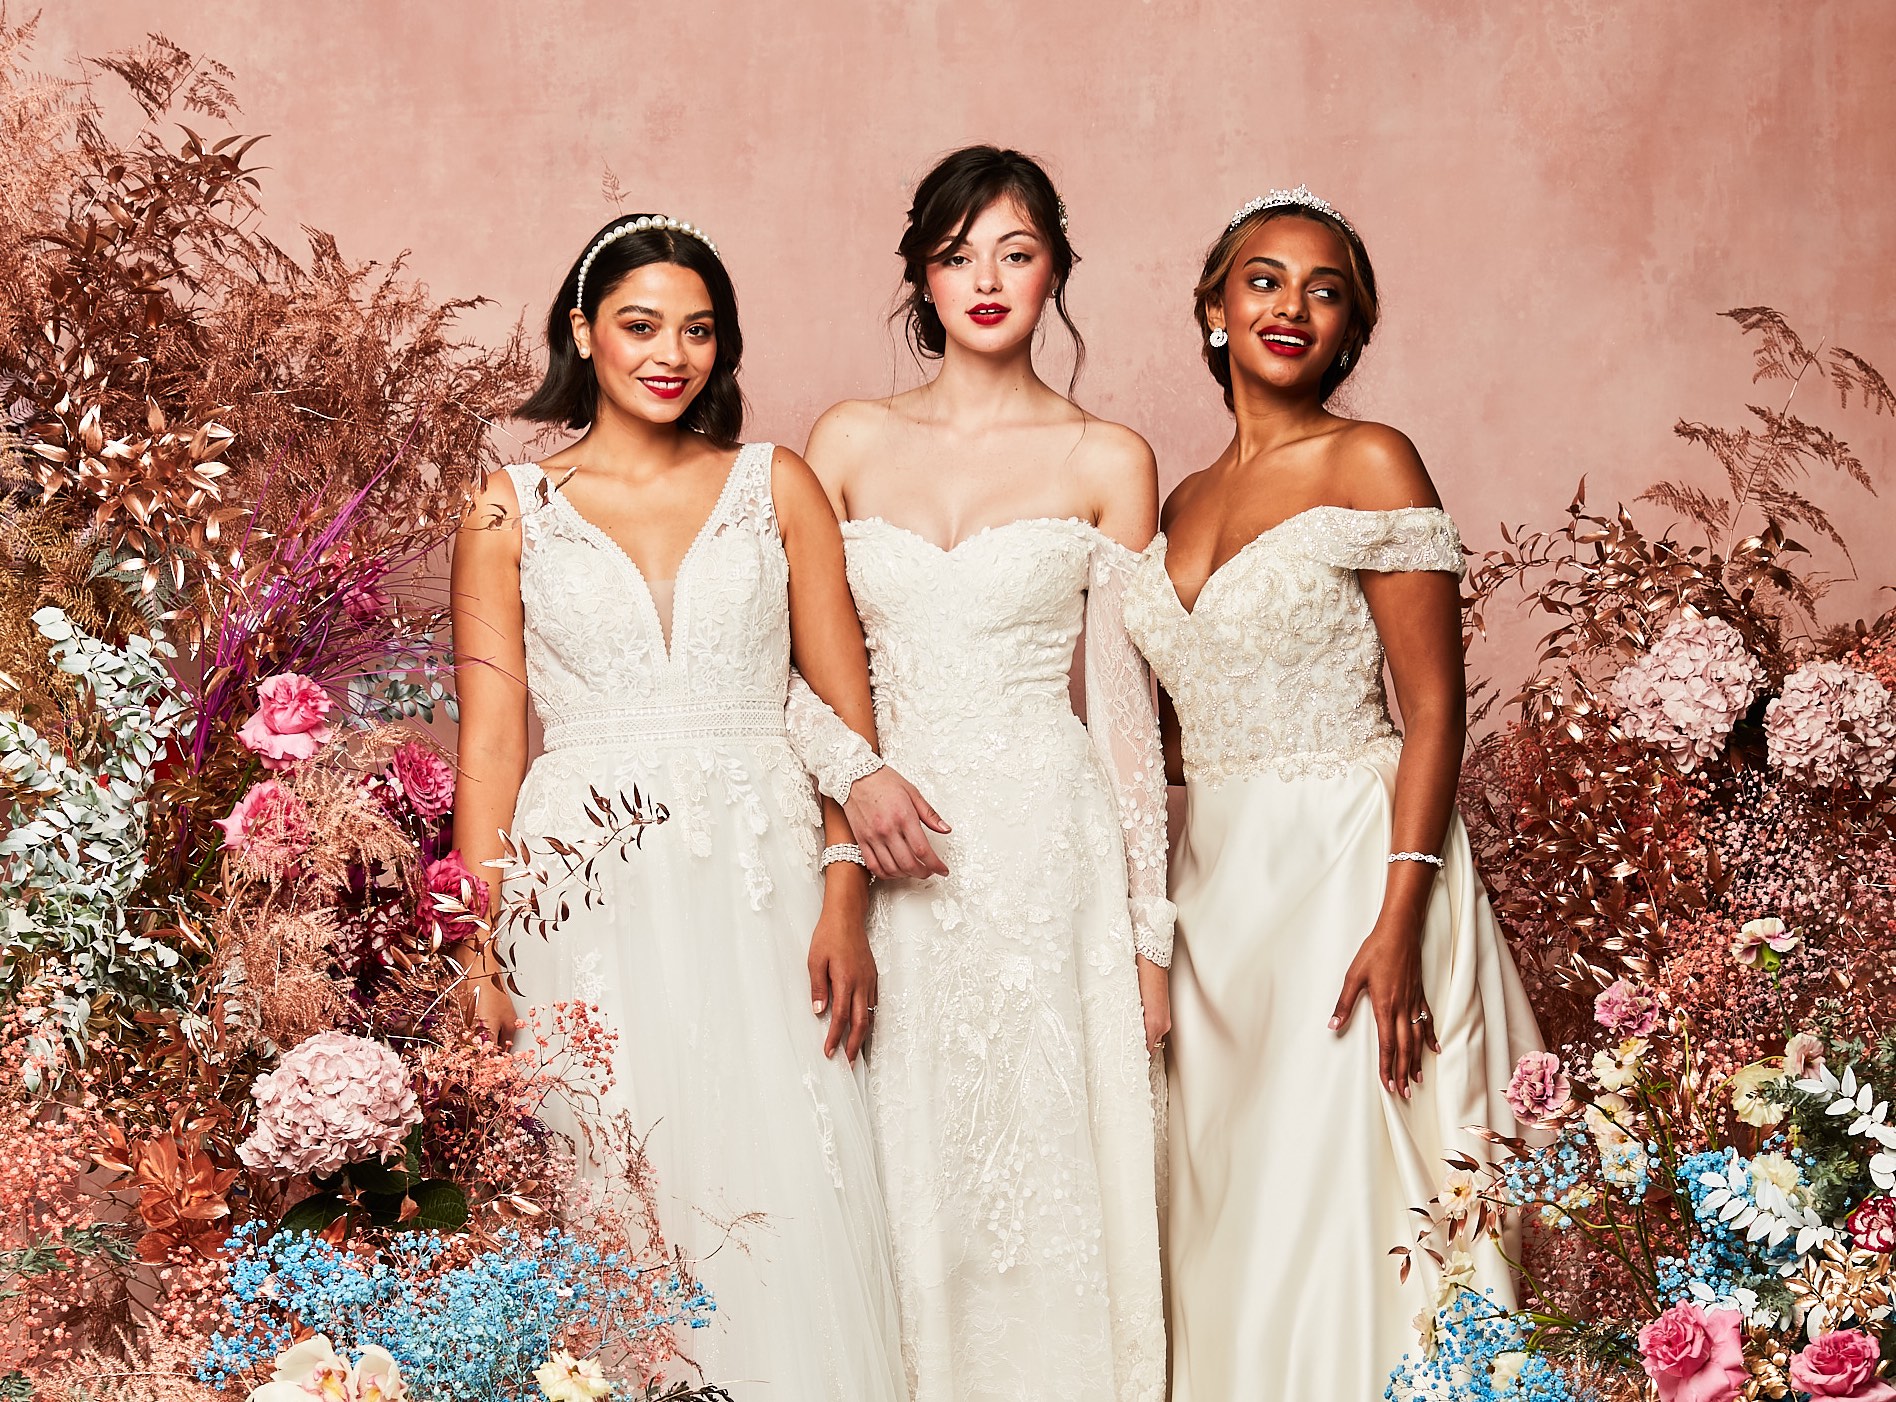 Loverly - David's Bridal Spring 2021 Collection: A Modern Fairytale